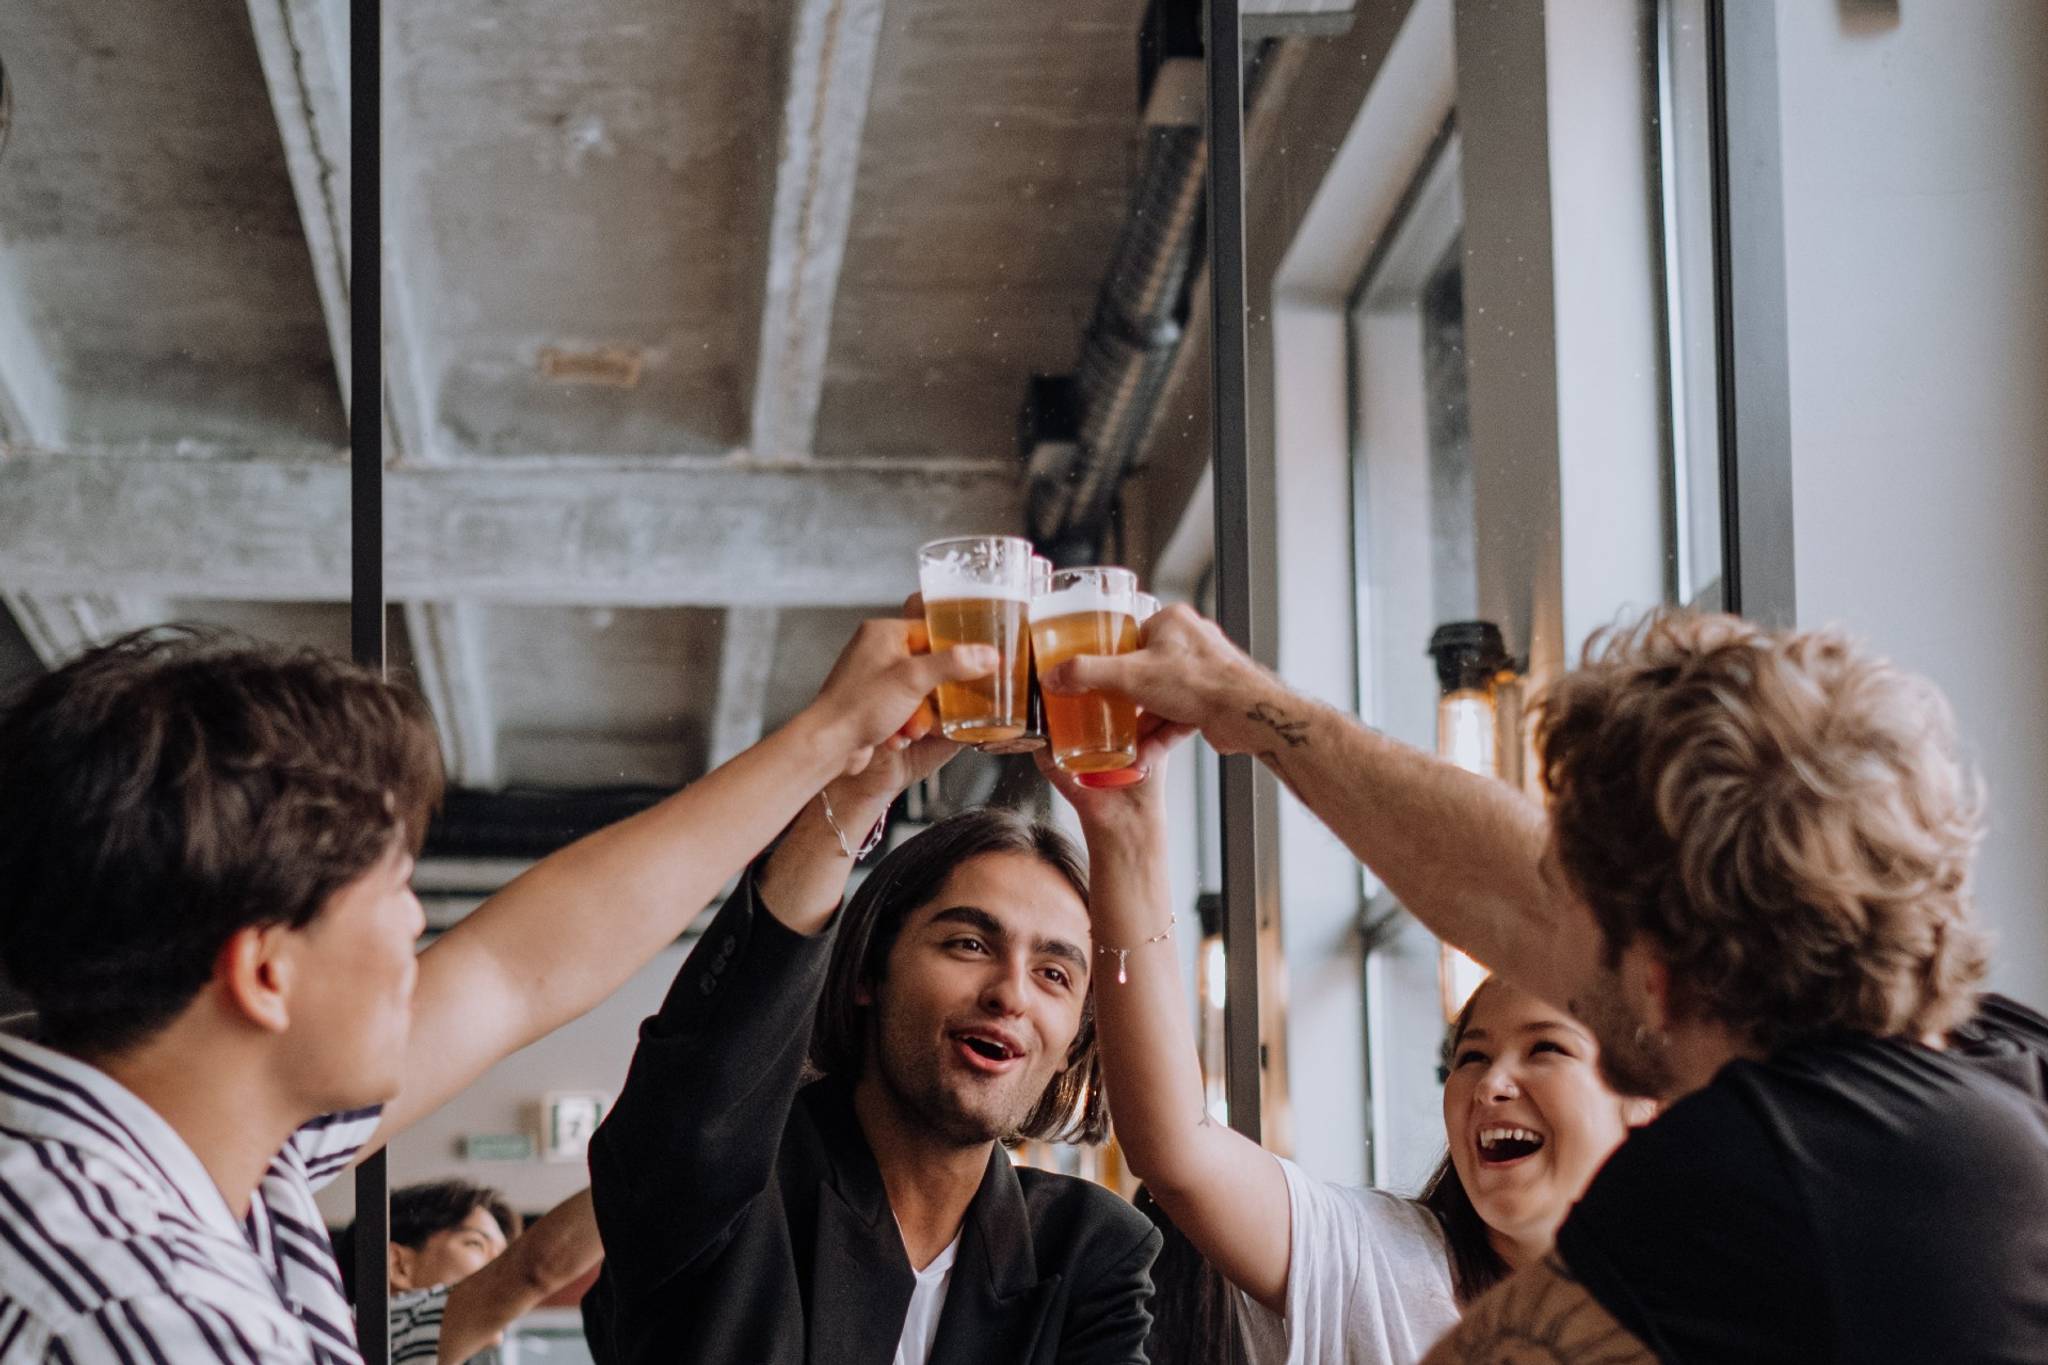 The Solar Exchange rewards clean energy with free beer